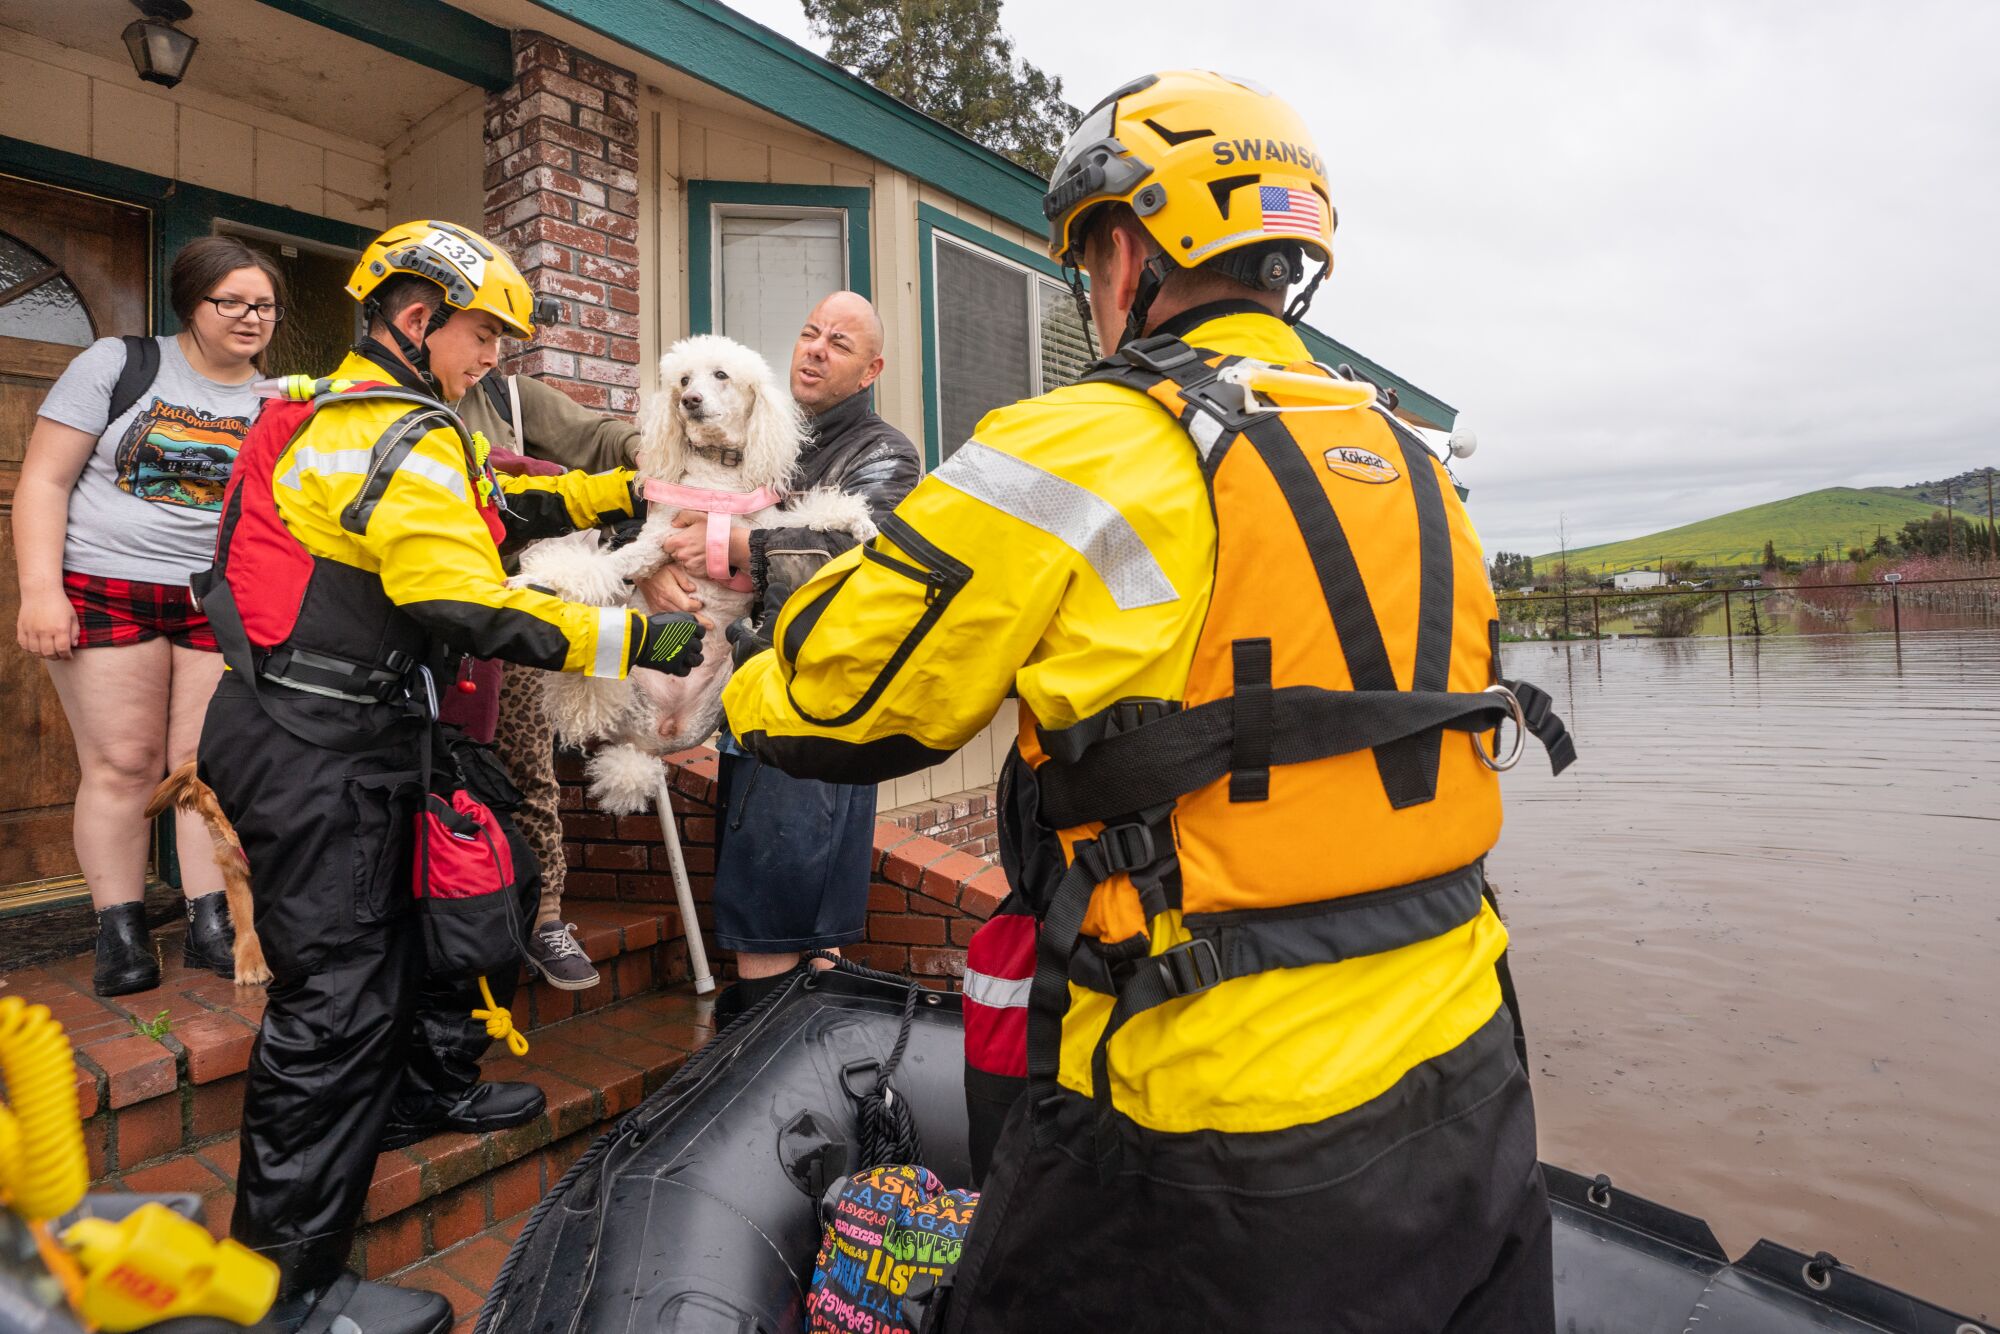 Rescuers take a dog presented by local residents on a raft.